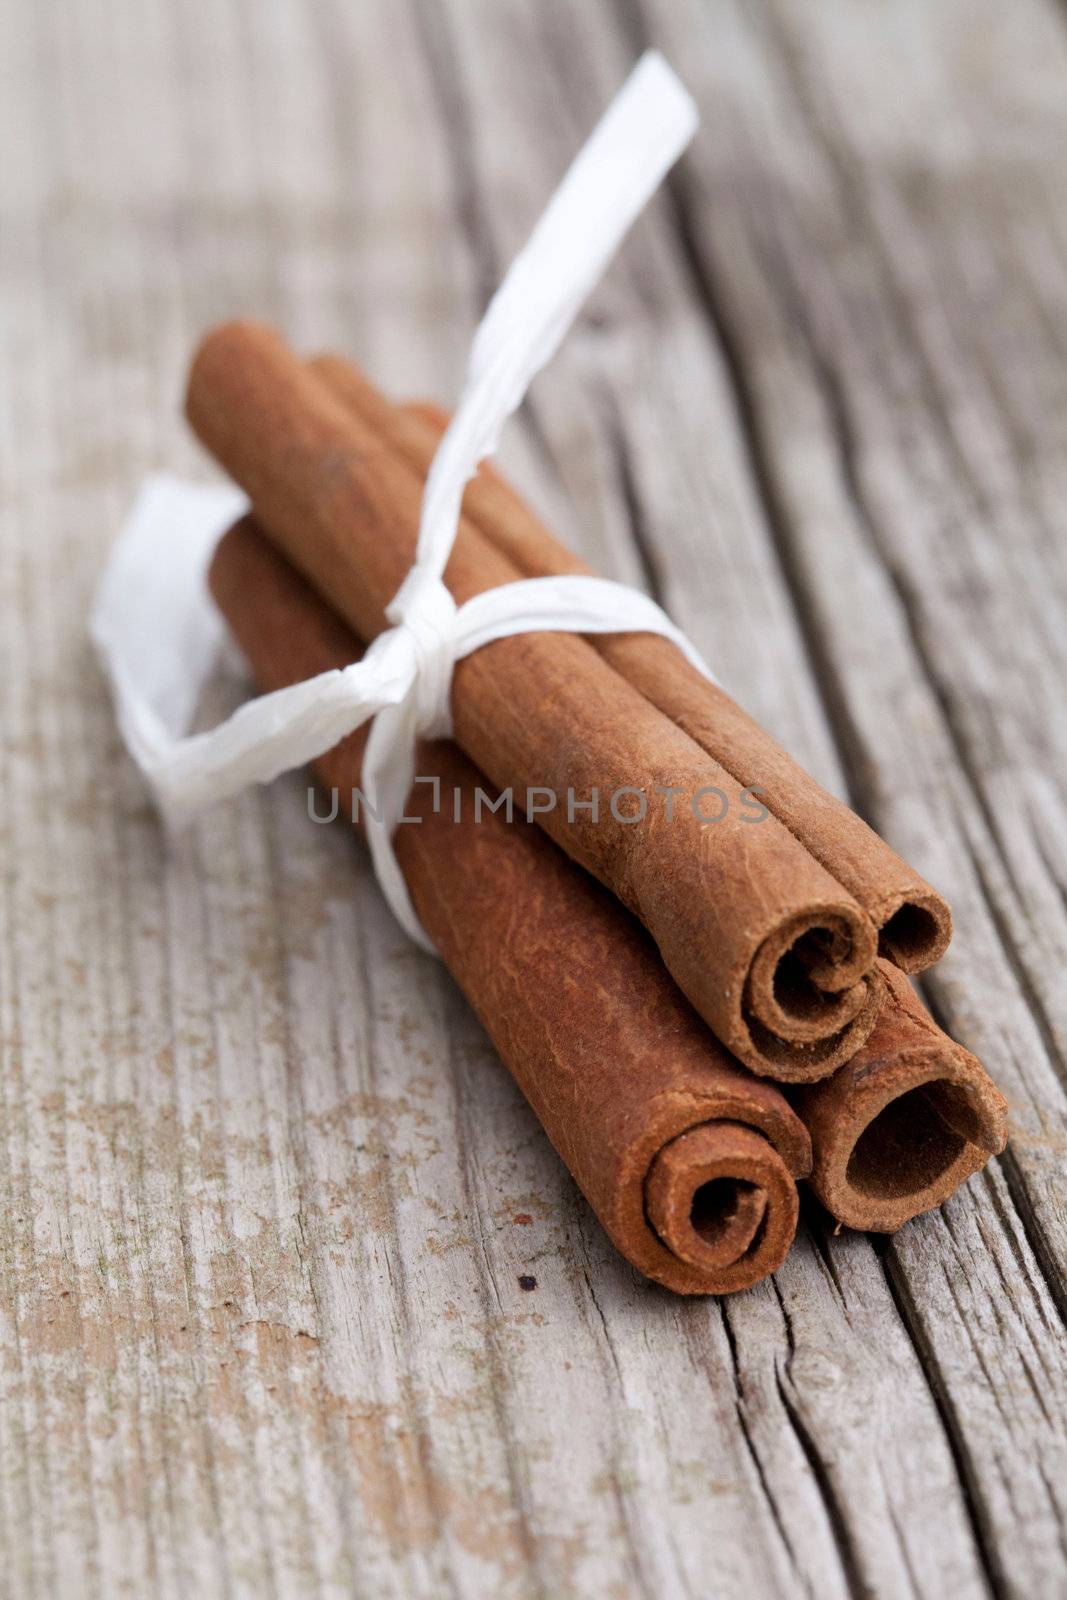 Cinnamon spice Sticks on wood by Bestpictures